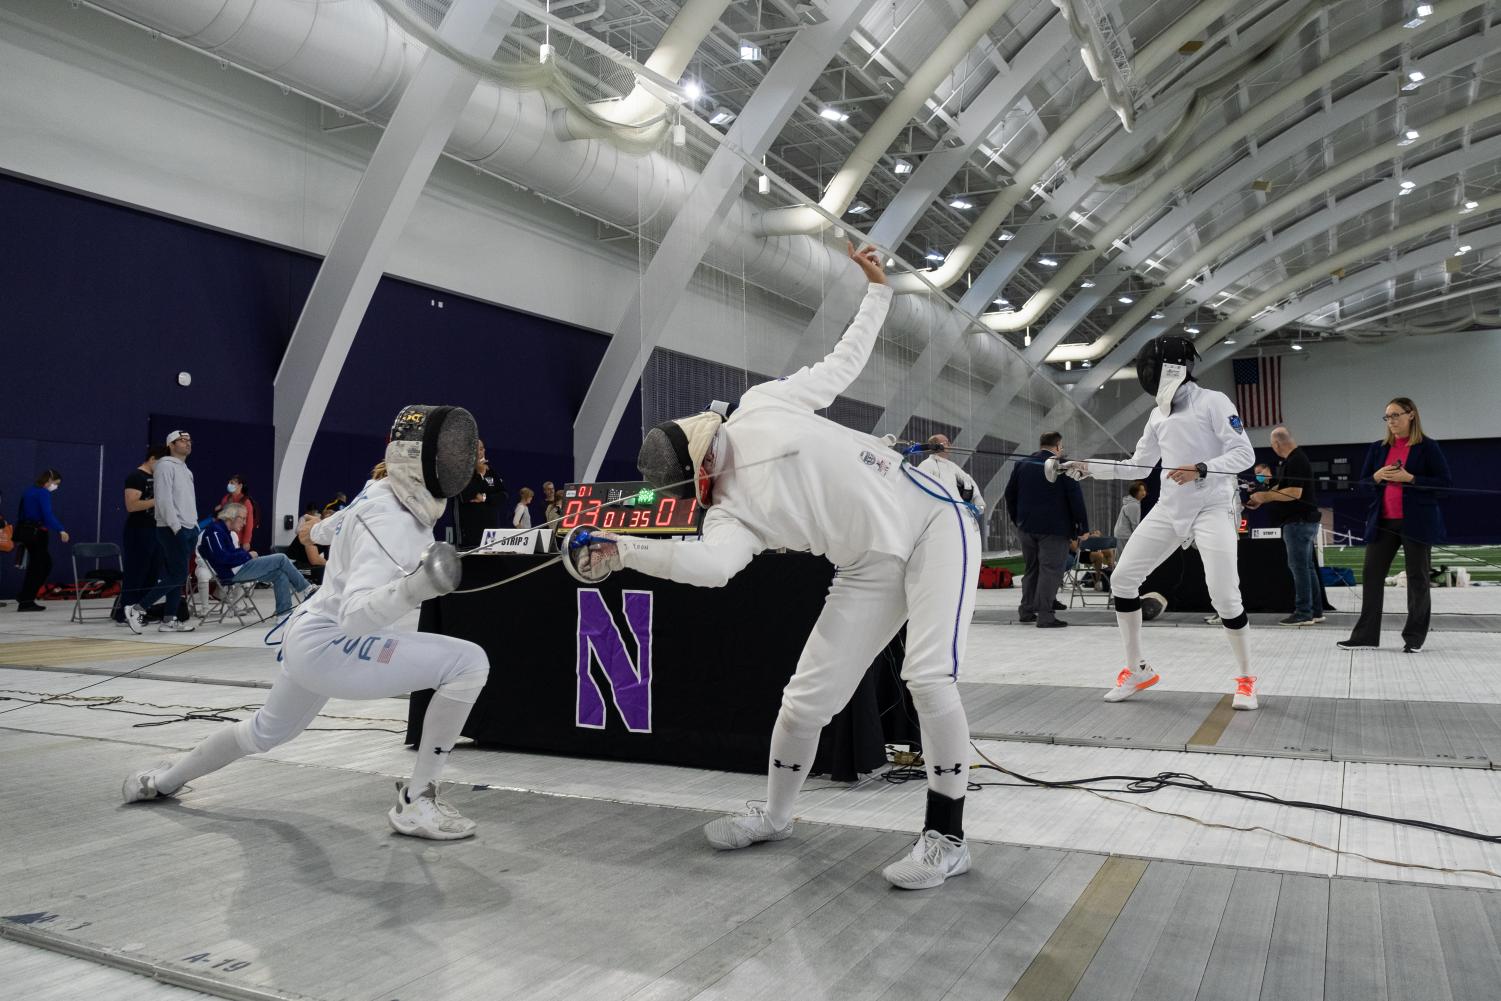 Two fencers hit each other with weapons, one bending over.